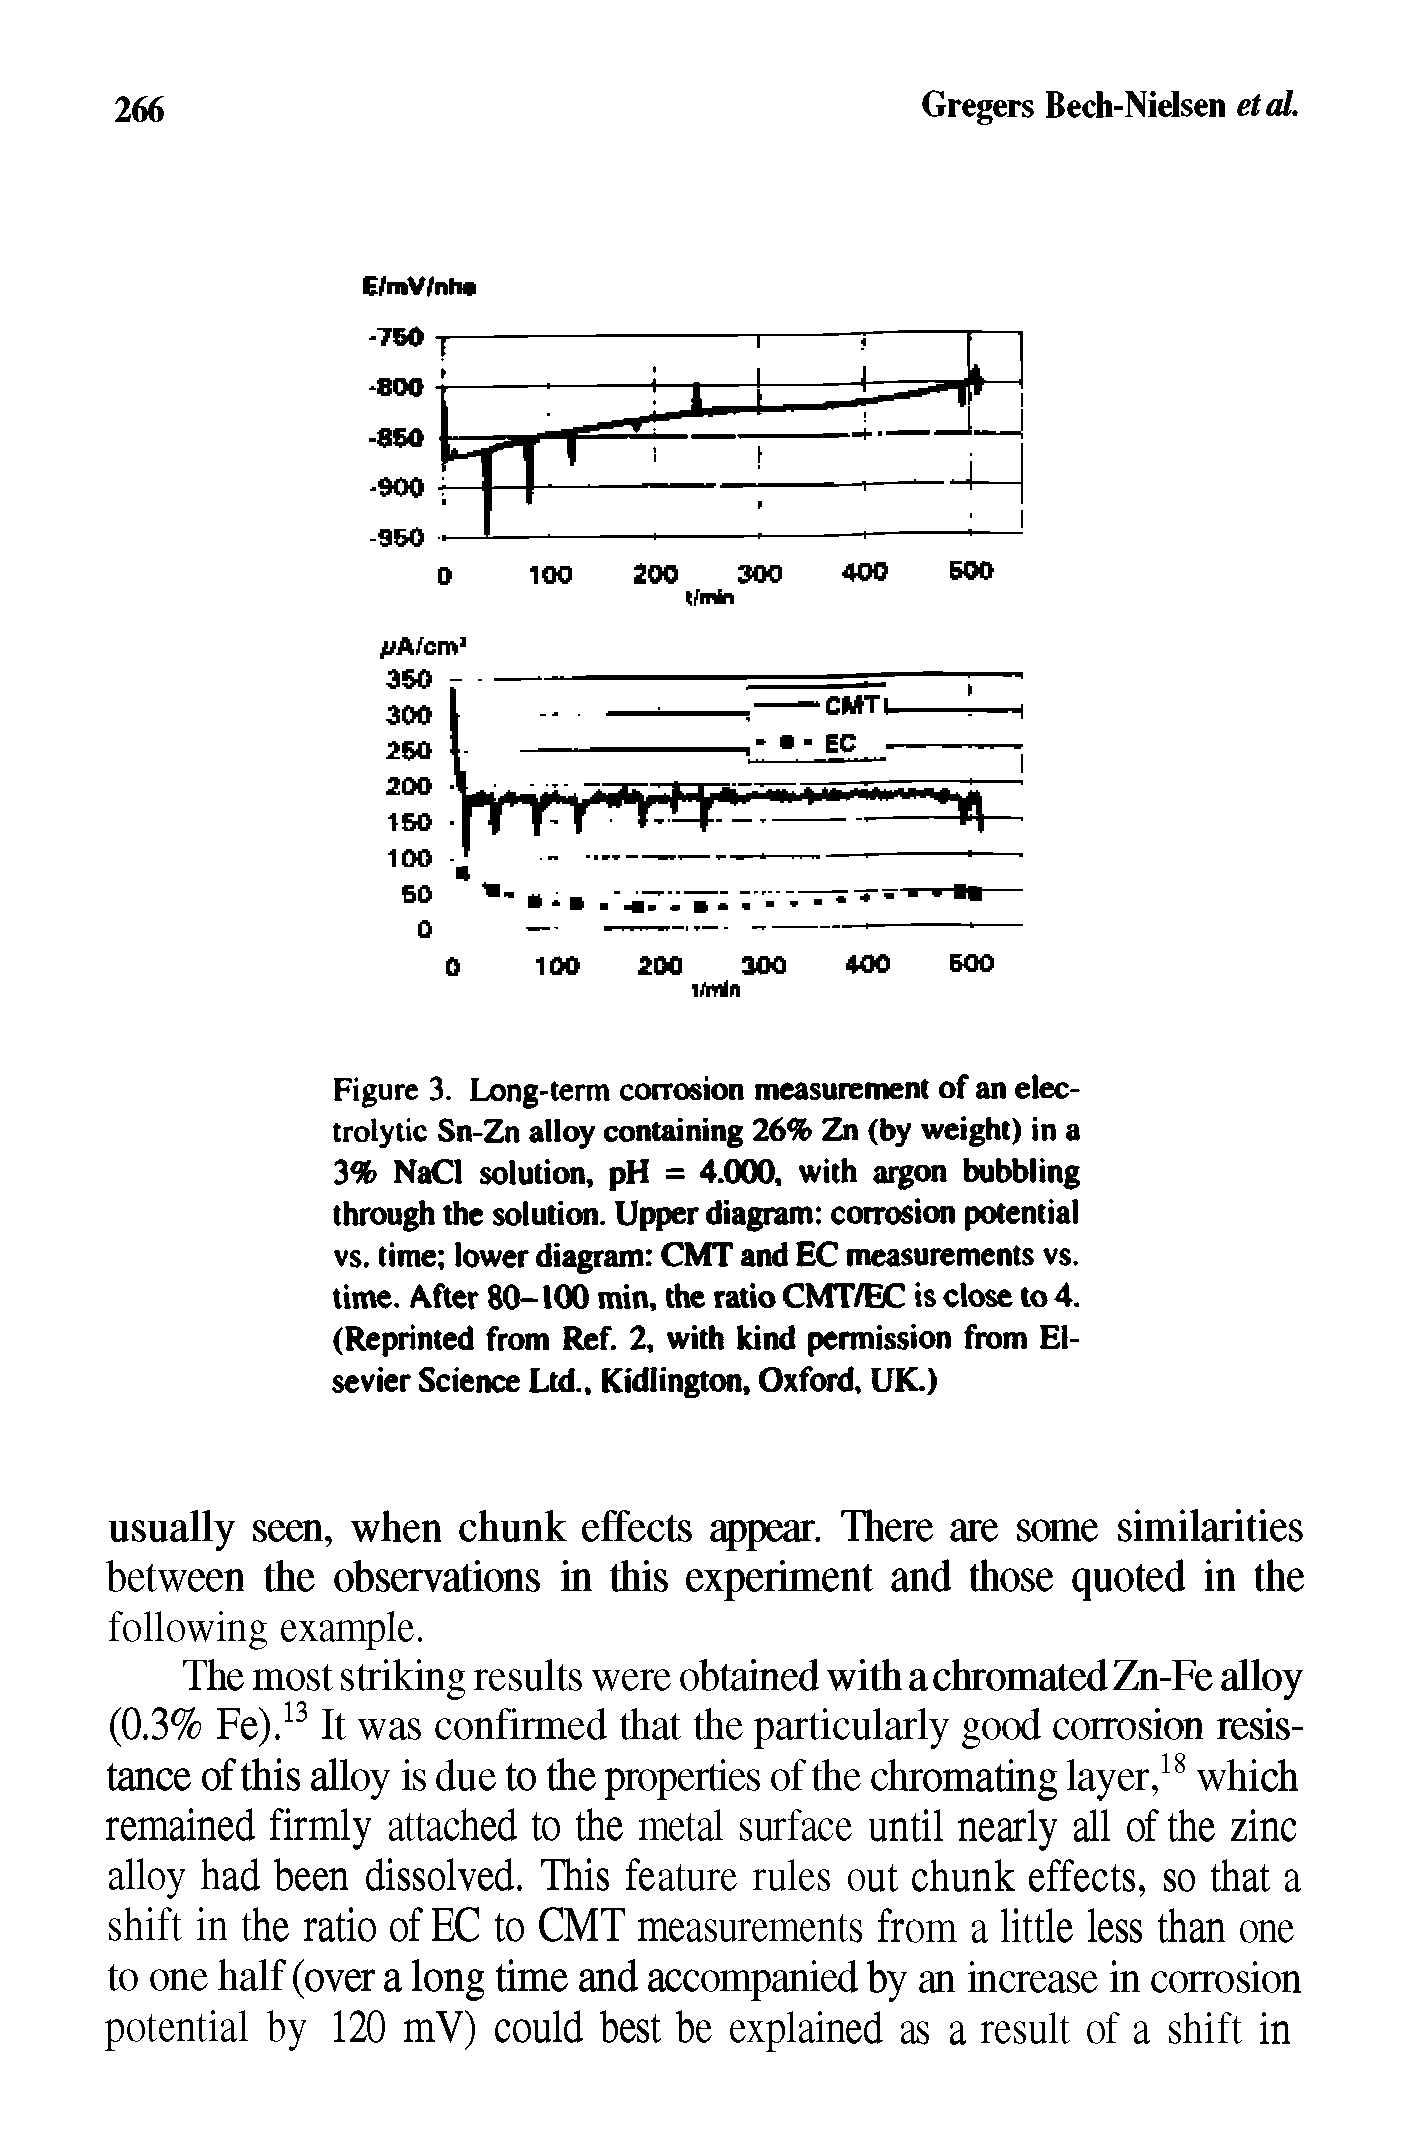 Figure 3. Long-term corrosion measurement of an electrolytic Sn-Zn alloy containing 26% Zn (by weight) in a 3% NaCI solution, pH = 4.000, with argon bubbling through the solution. Upper diagram corrosion potential vs. time lower diagram CMT and EC measurements vs. time. After 80-100 min, the ratio CMT/BC is close to 4. (Reprinted from Ref. 2, with kind permission from Elsevier Science Ltd., Kidlington, Oxfmd, UK.)...